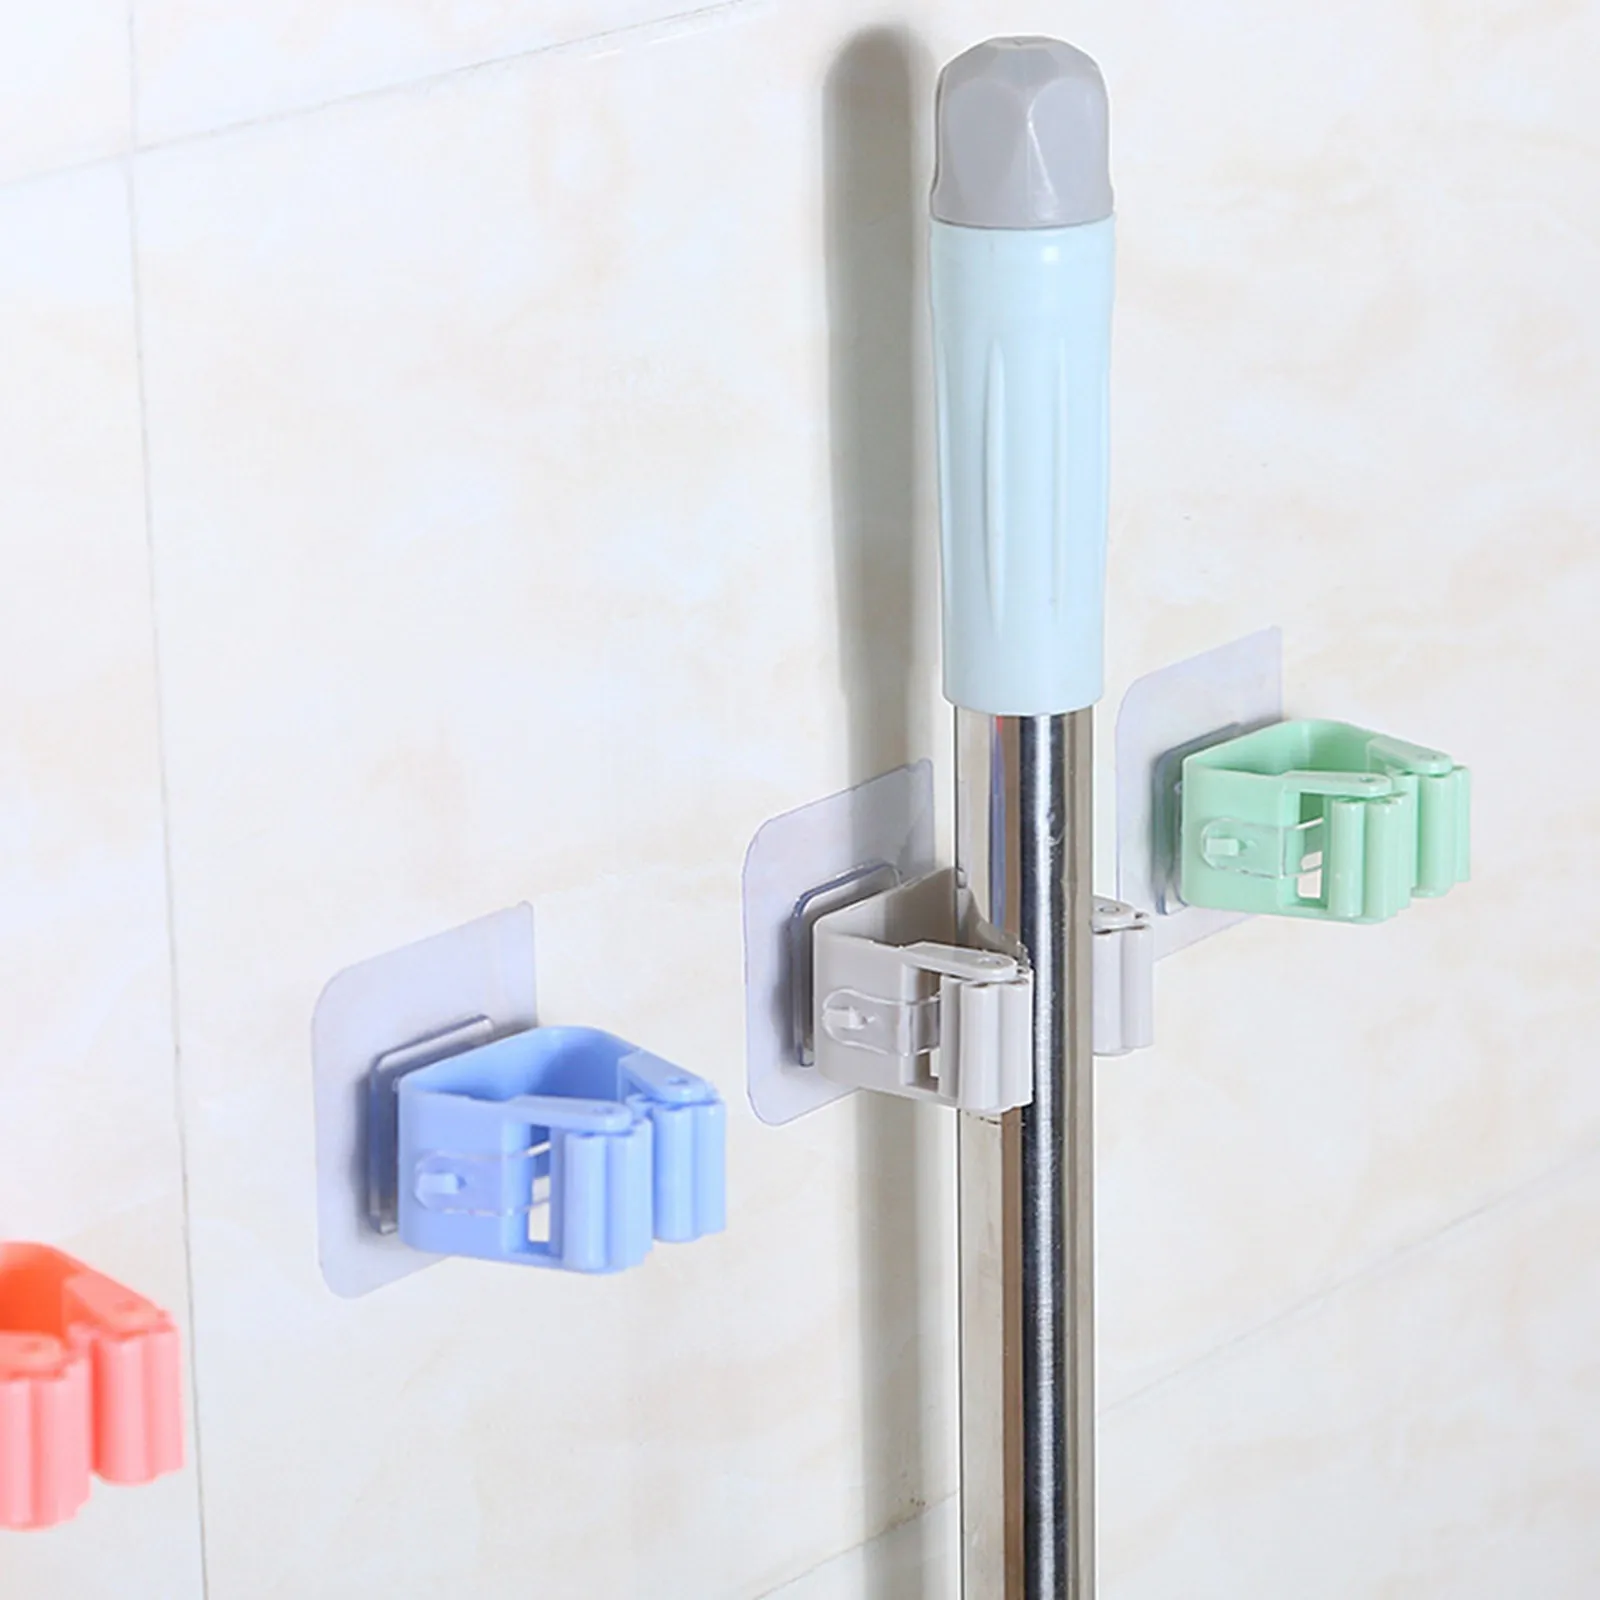 

4 Piece Set Of Perforated Bathroom Mop Hooks Self Adhesive Non Drilling Slip Hooks Mop Holder Traceless Hooks Wall Mounted Mop